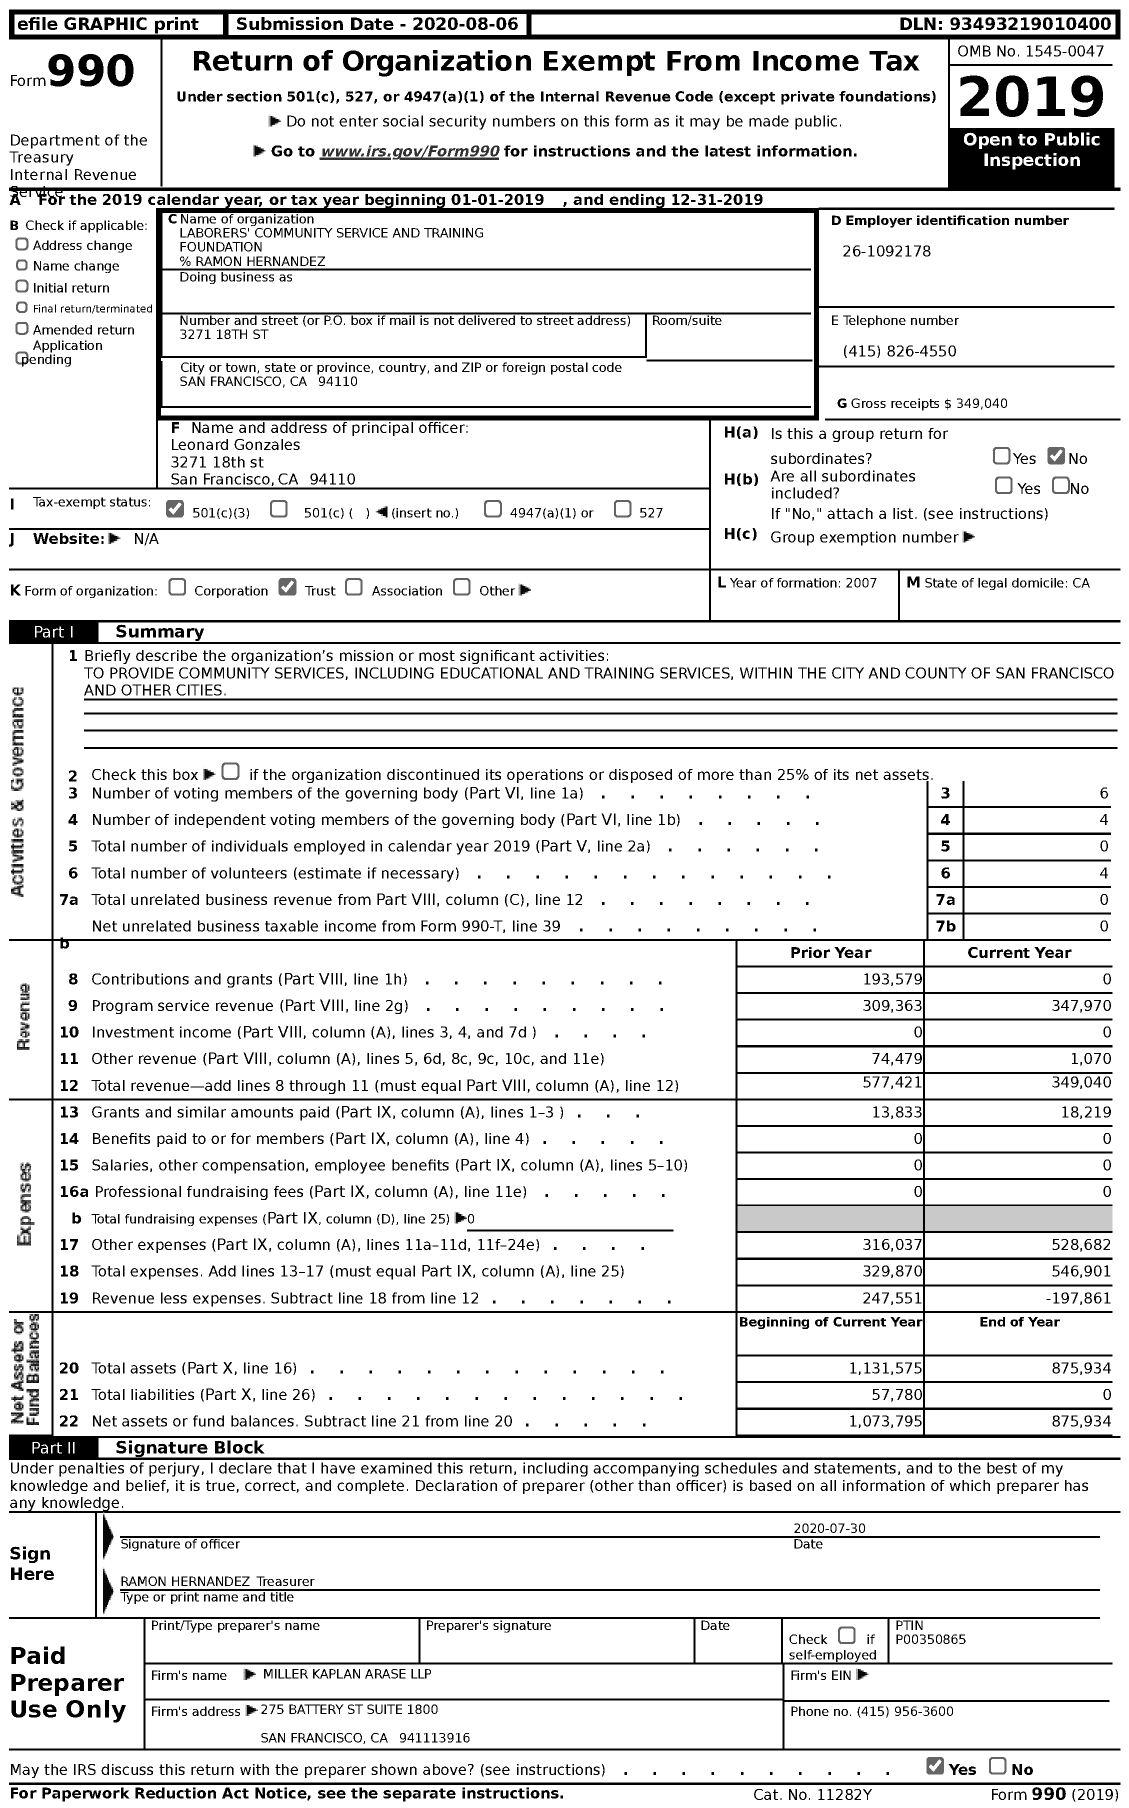 Image of first page of 2019 Form 990 for Laborers' Community Service and Training Foundation